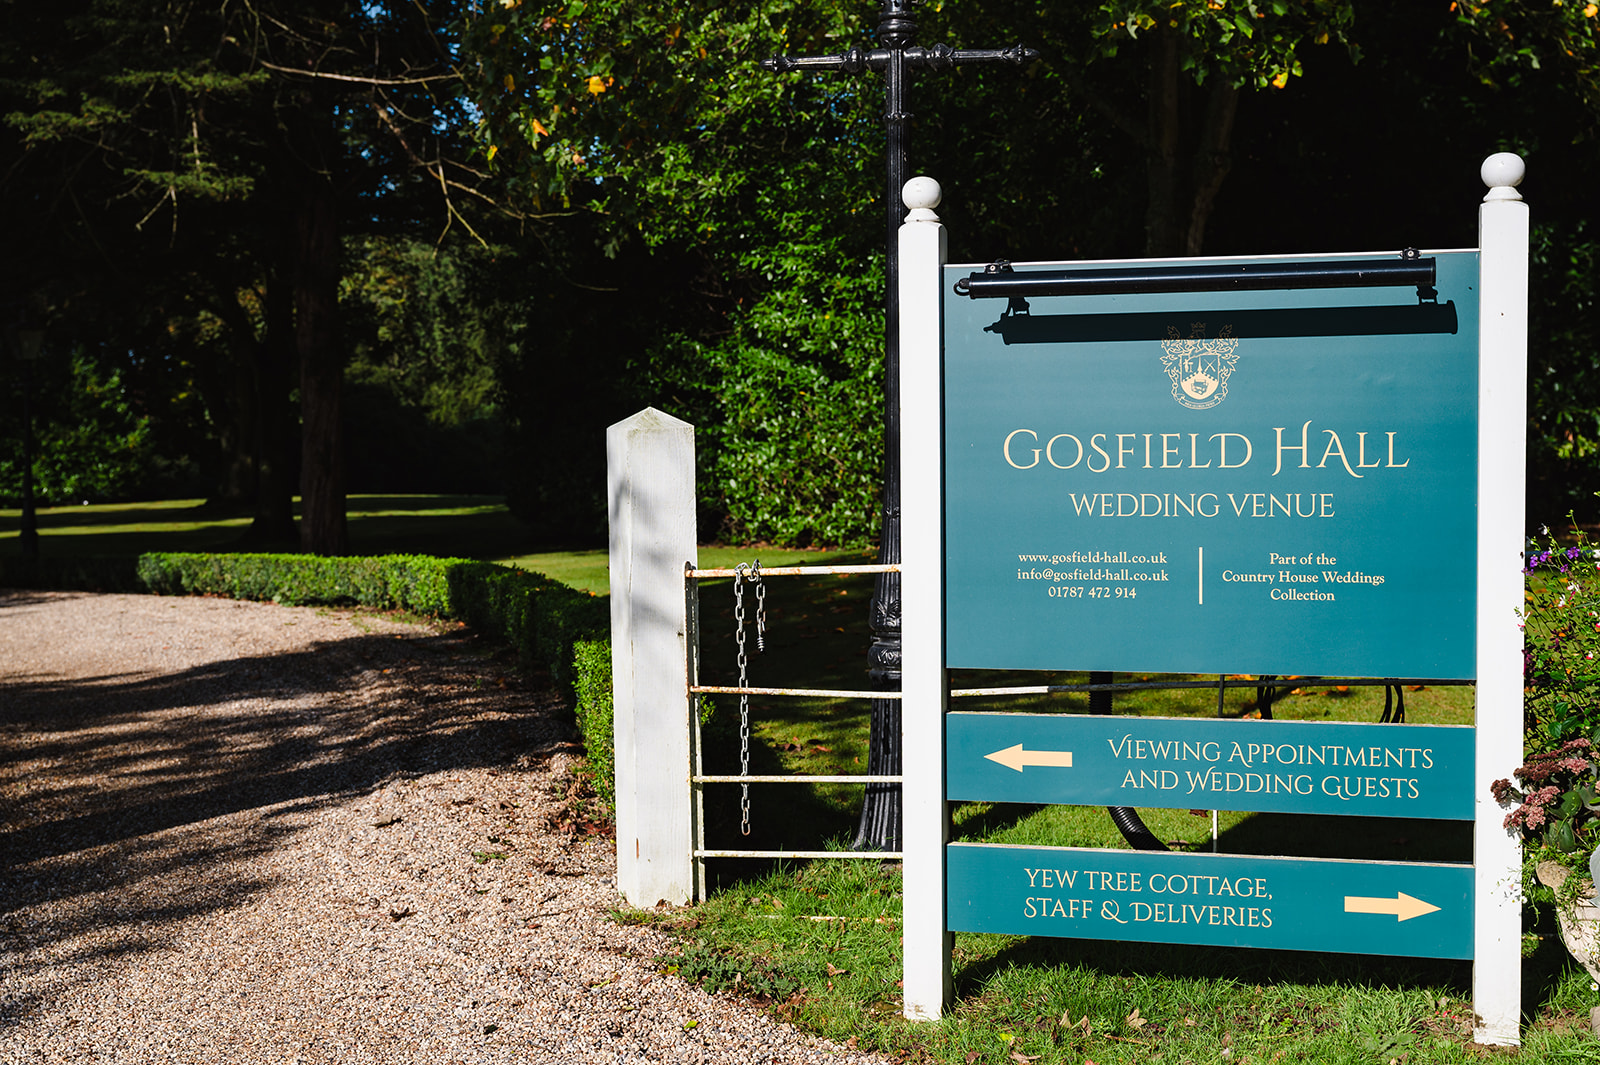 Entrance to gosfield hall